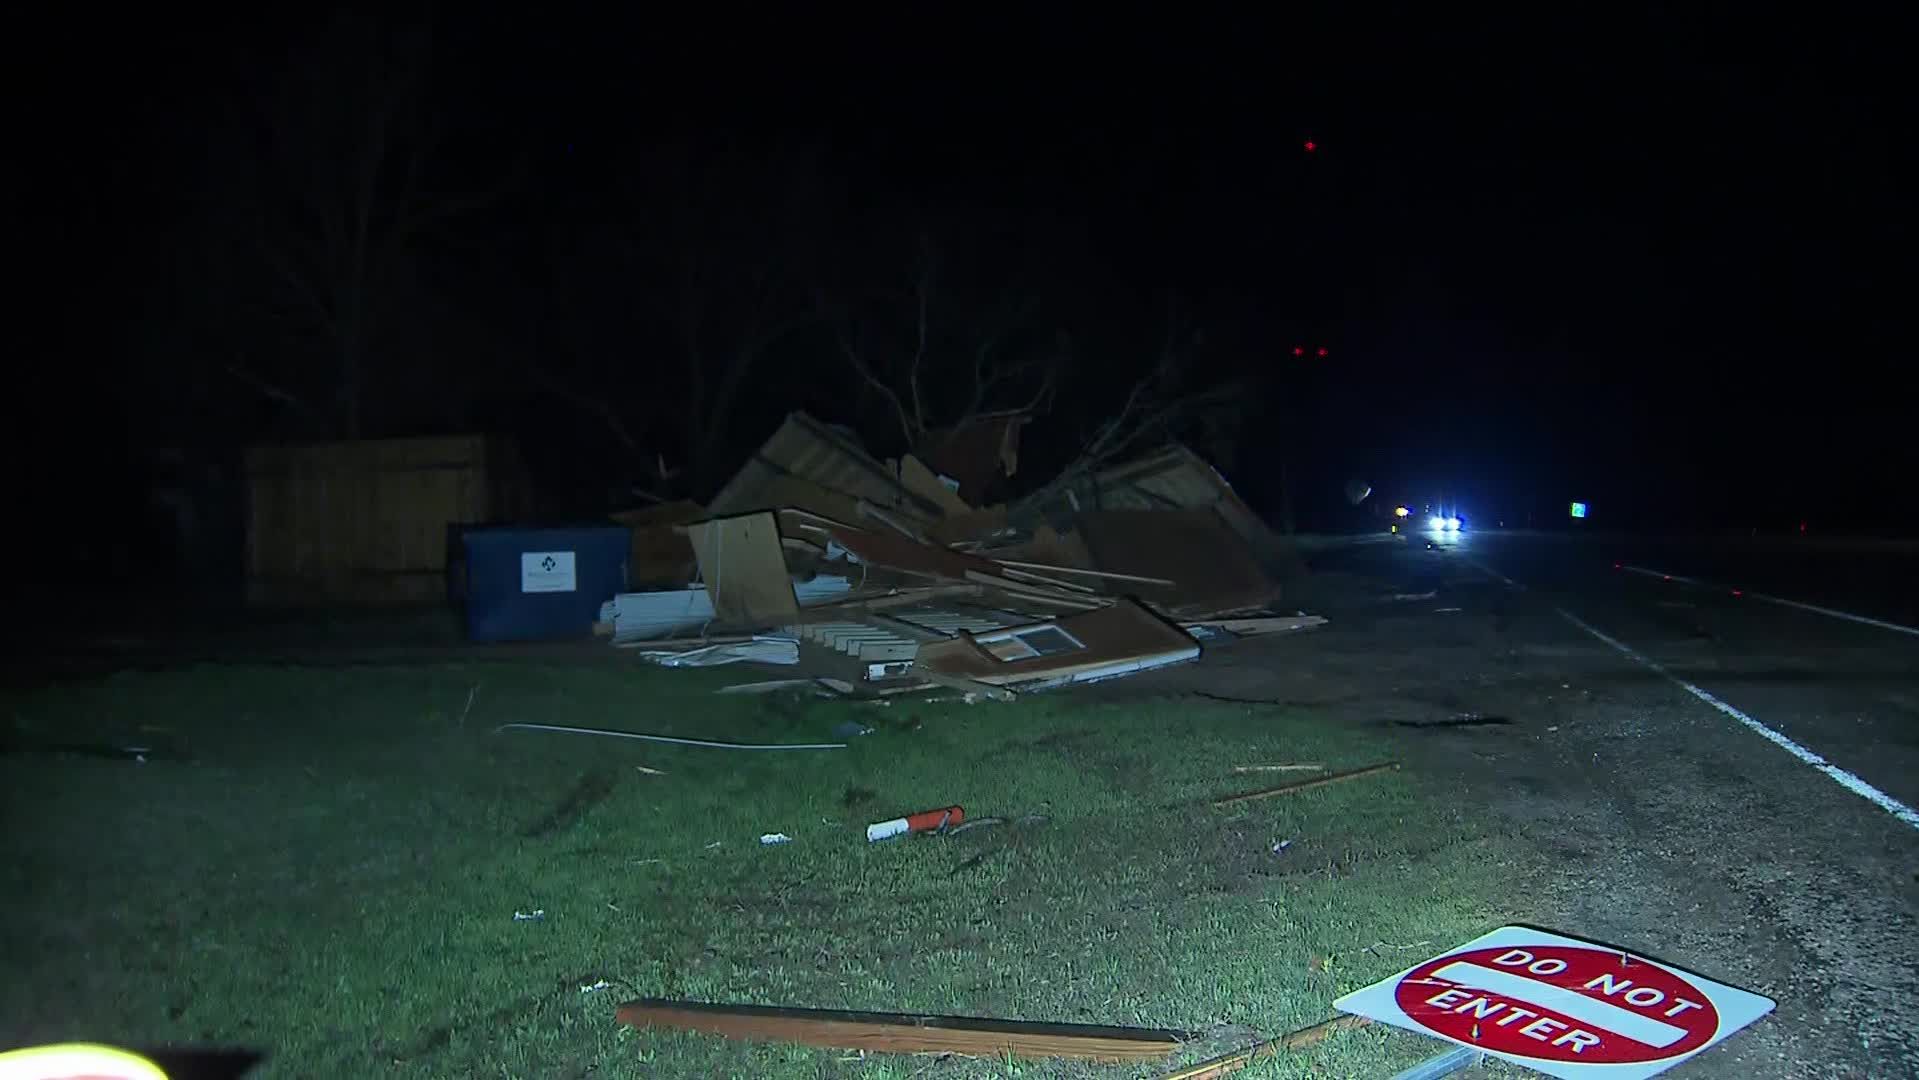 Debris is strewn on a lawn in Wise County in Texas after a severe storm overnight on Thursday.